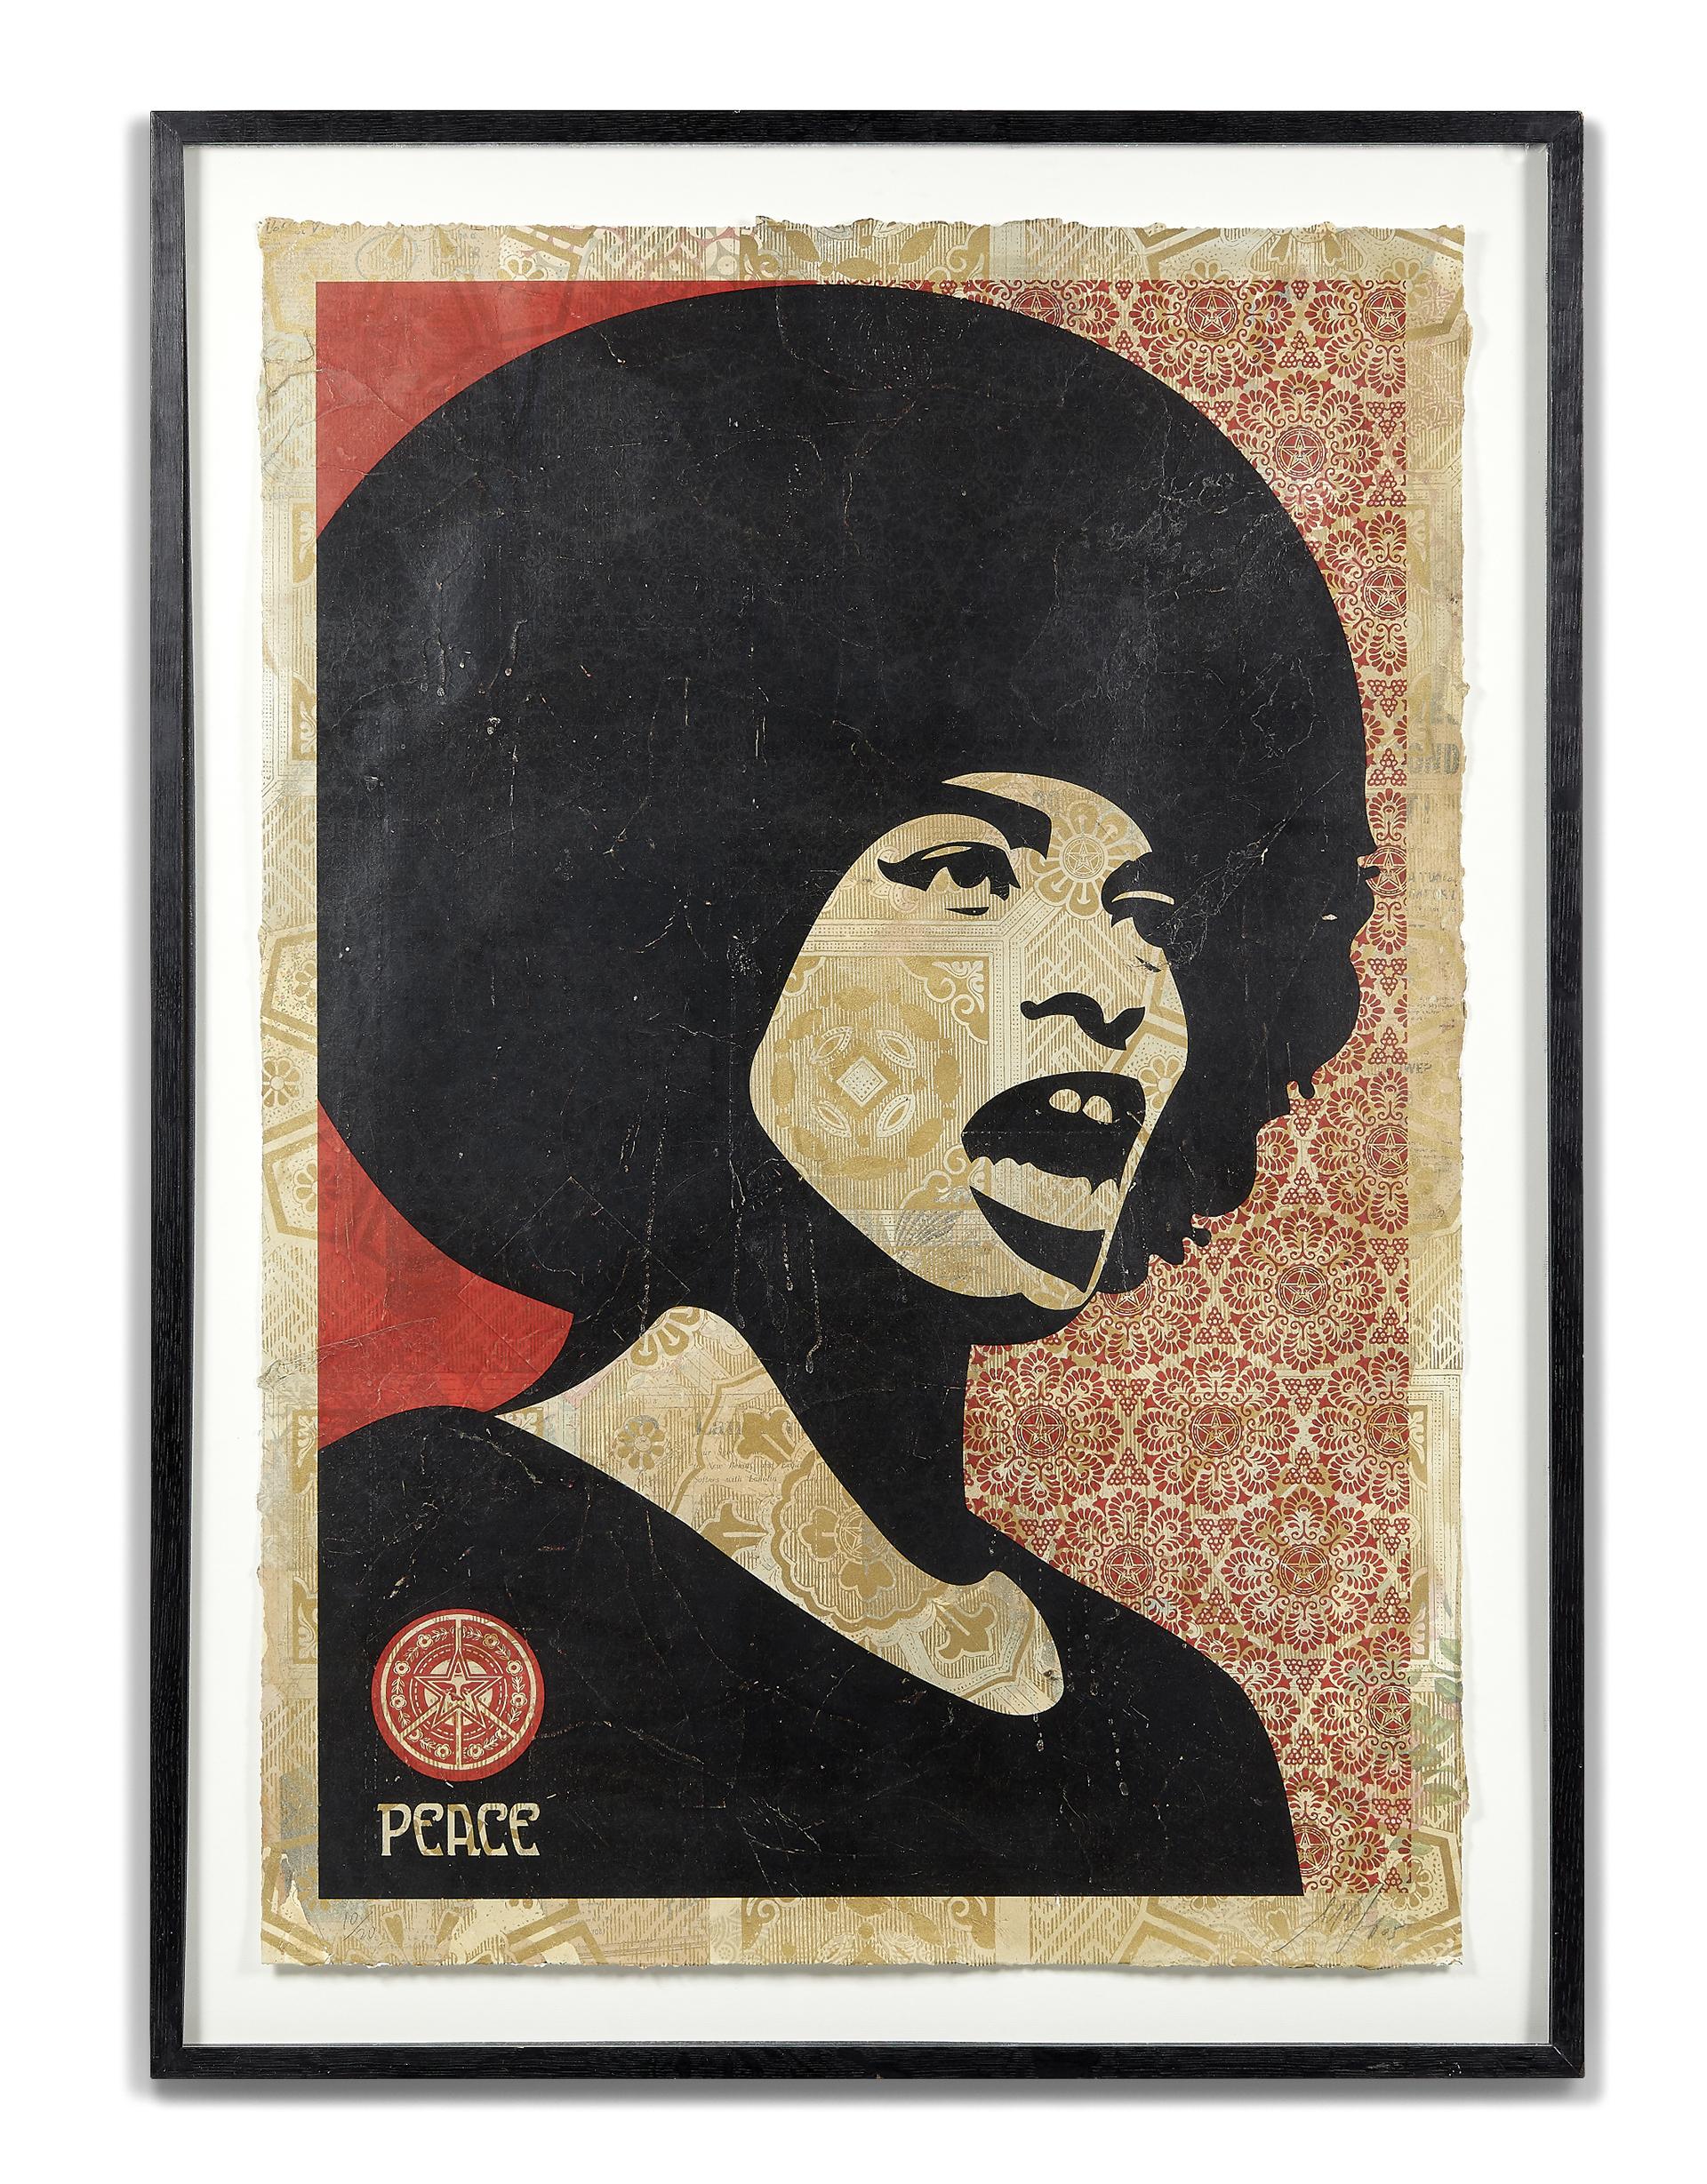 In the frame: Shepard Fairey | Square Mile